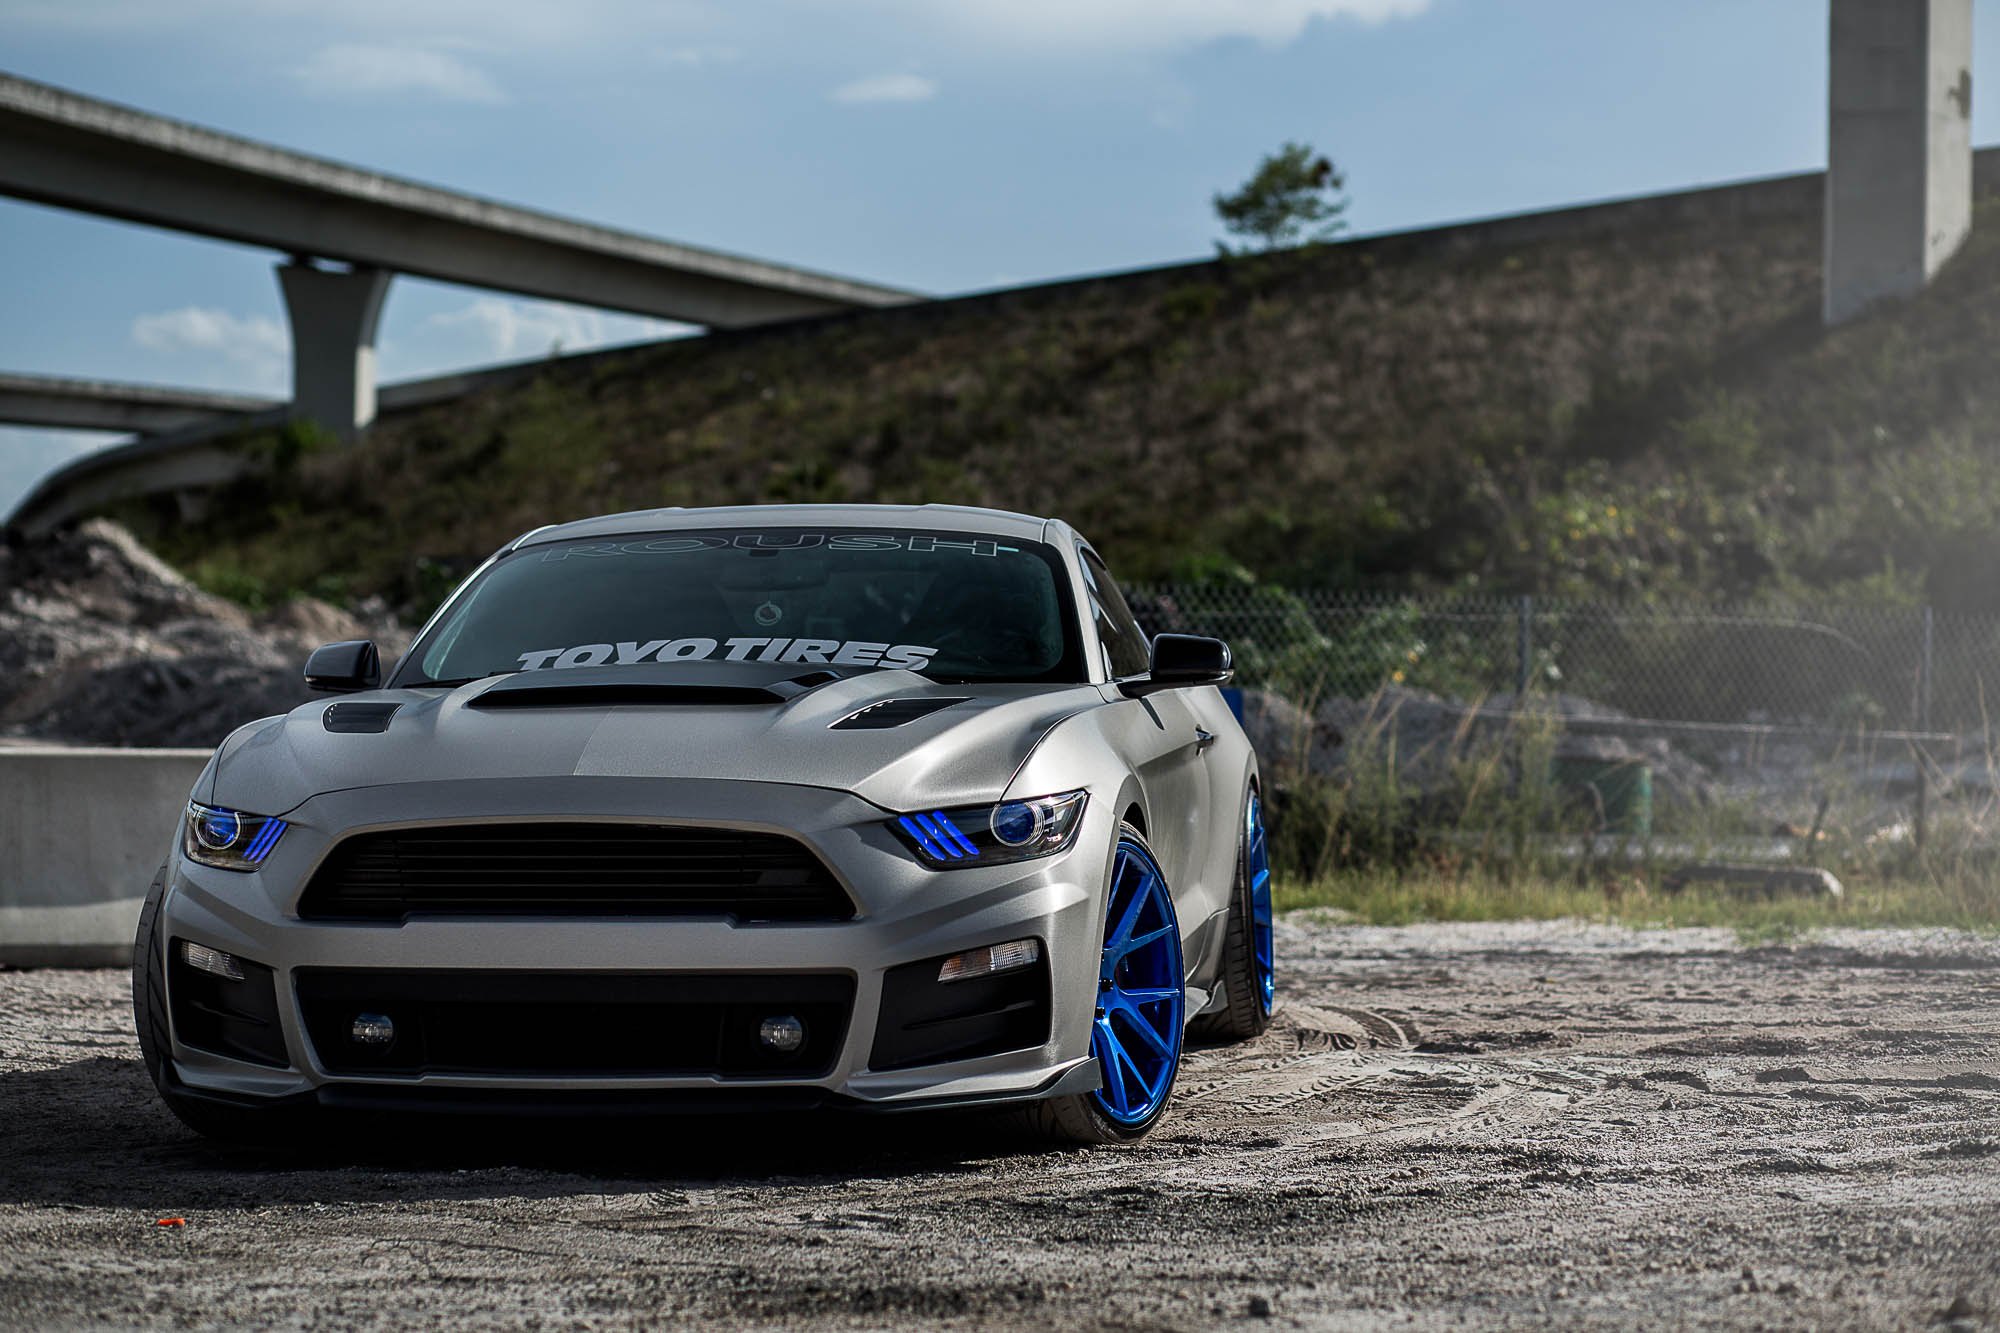 Roush performance supercharged S550 Mustang - Photo by Vossen